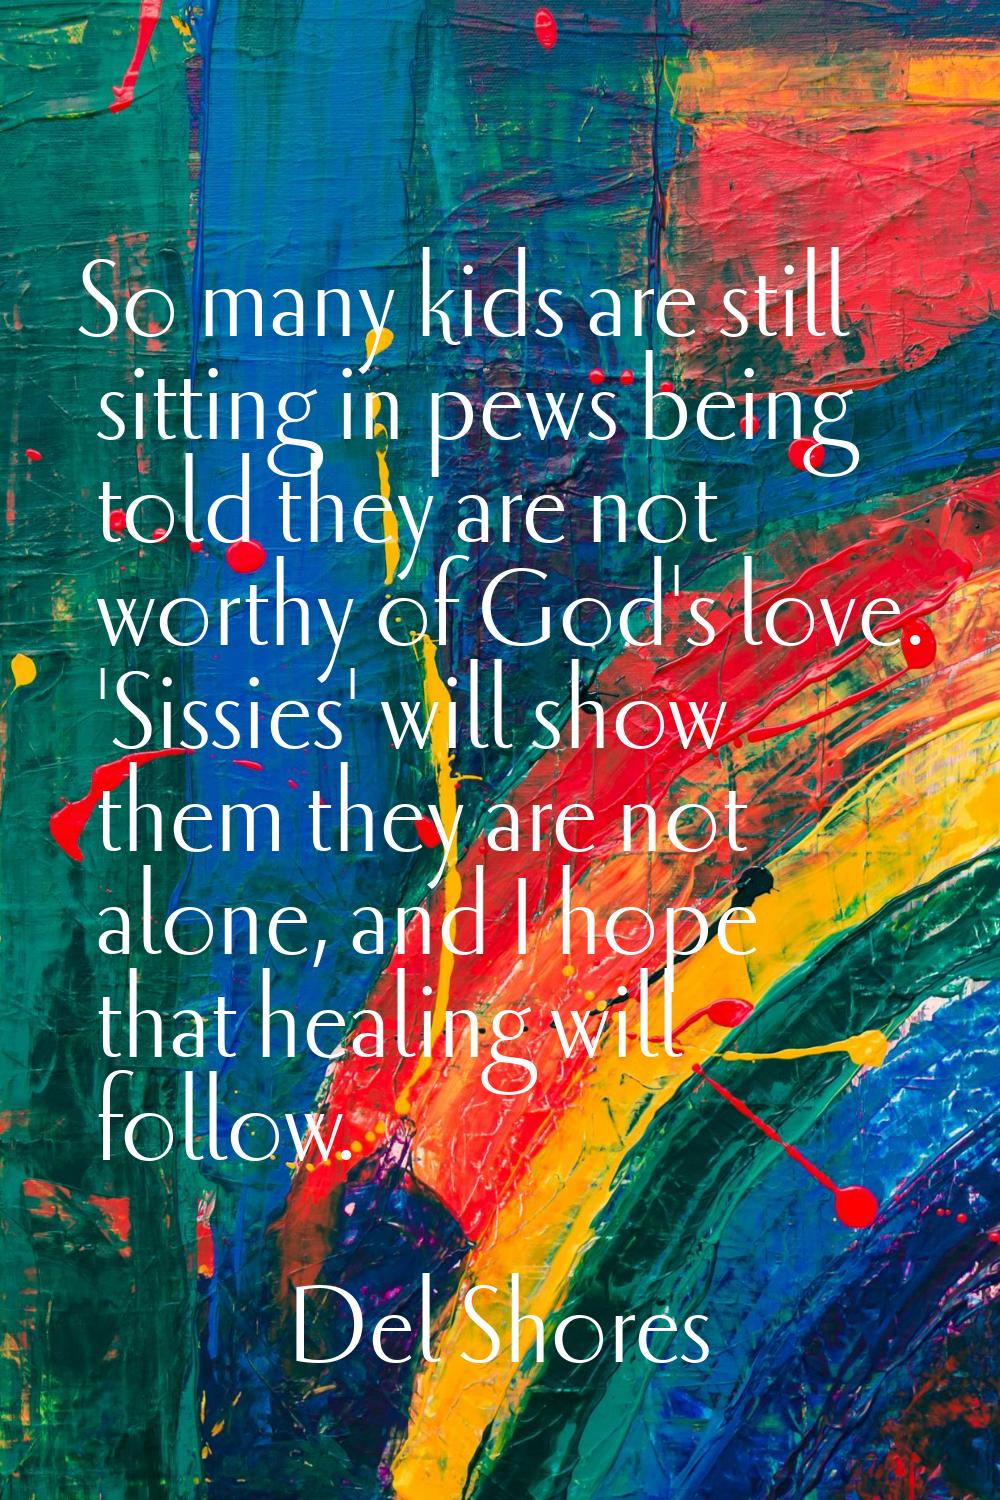 So many kids are still sitting in pews being told they are not worthy of God's love. 'Sissies' will